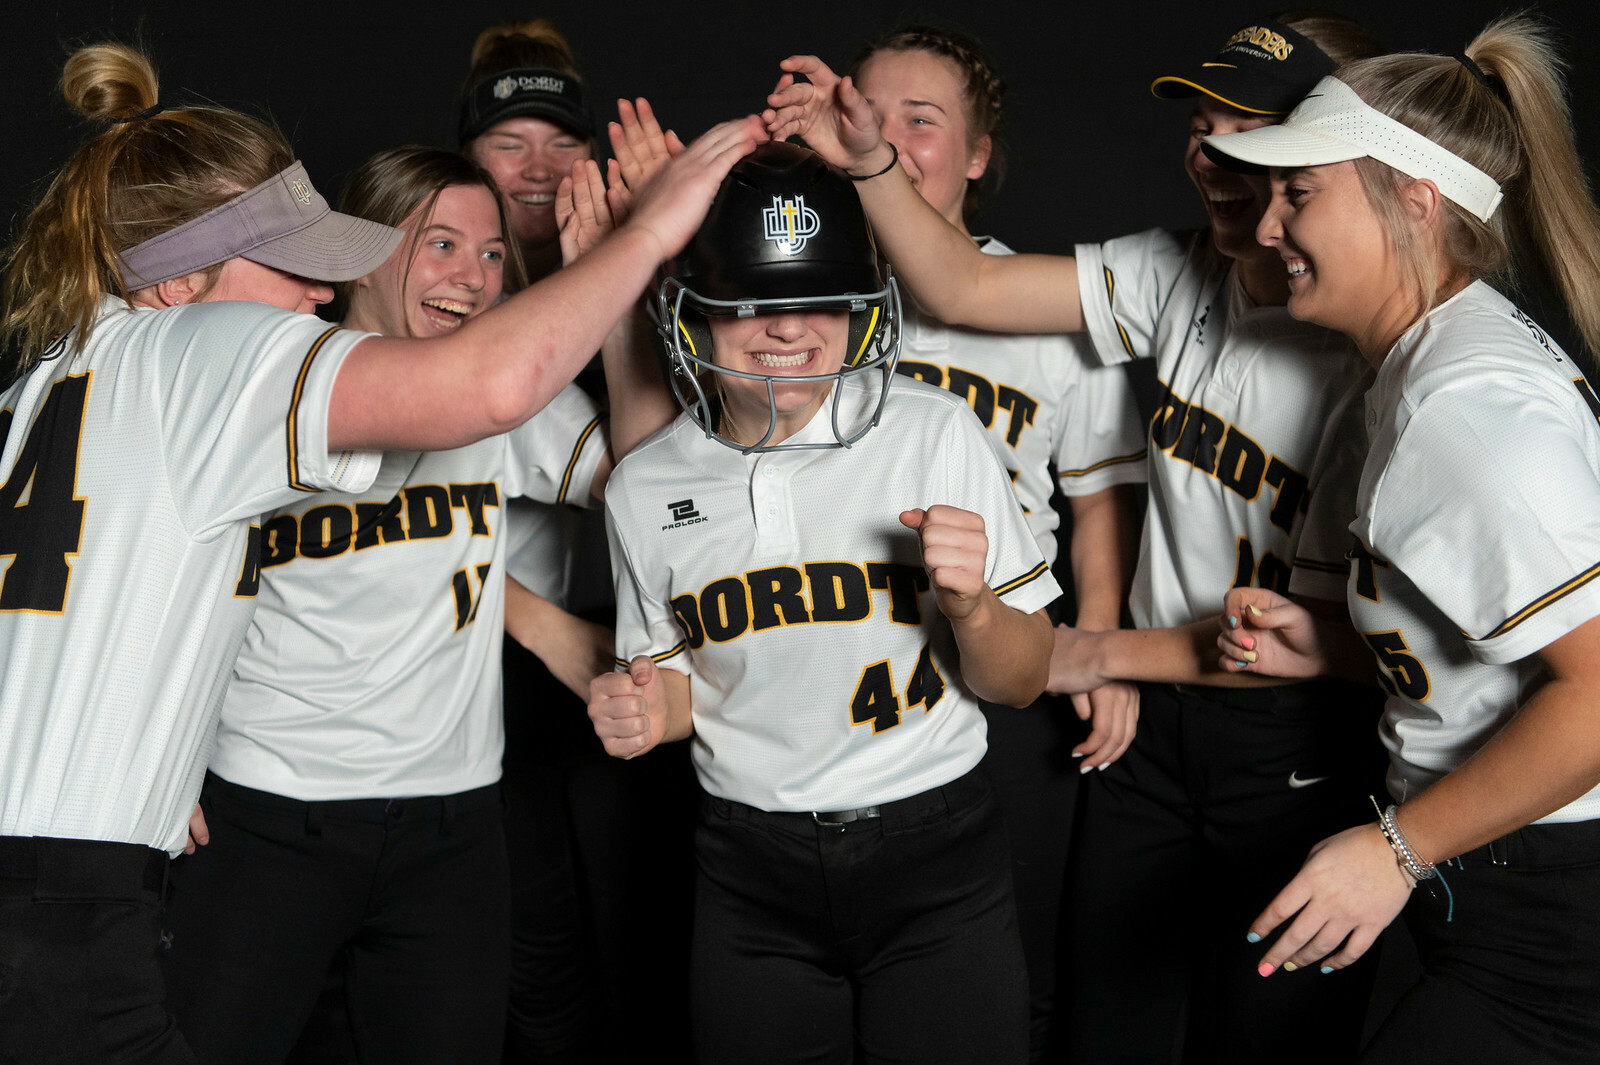 Dordt's softball team all hit their teammate who is wearing a helmet on the head